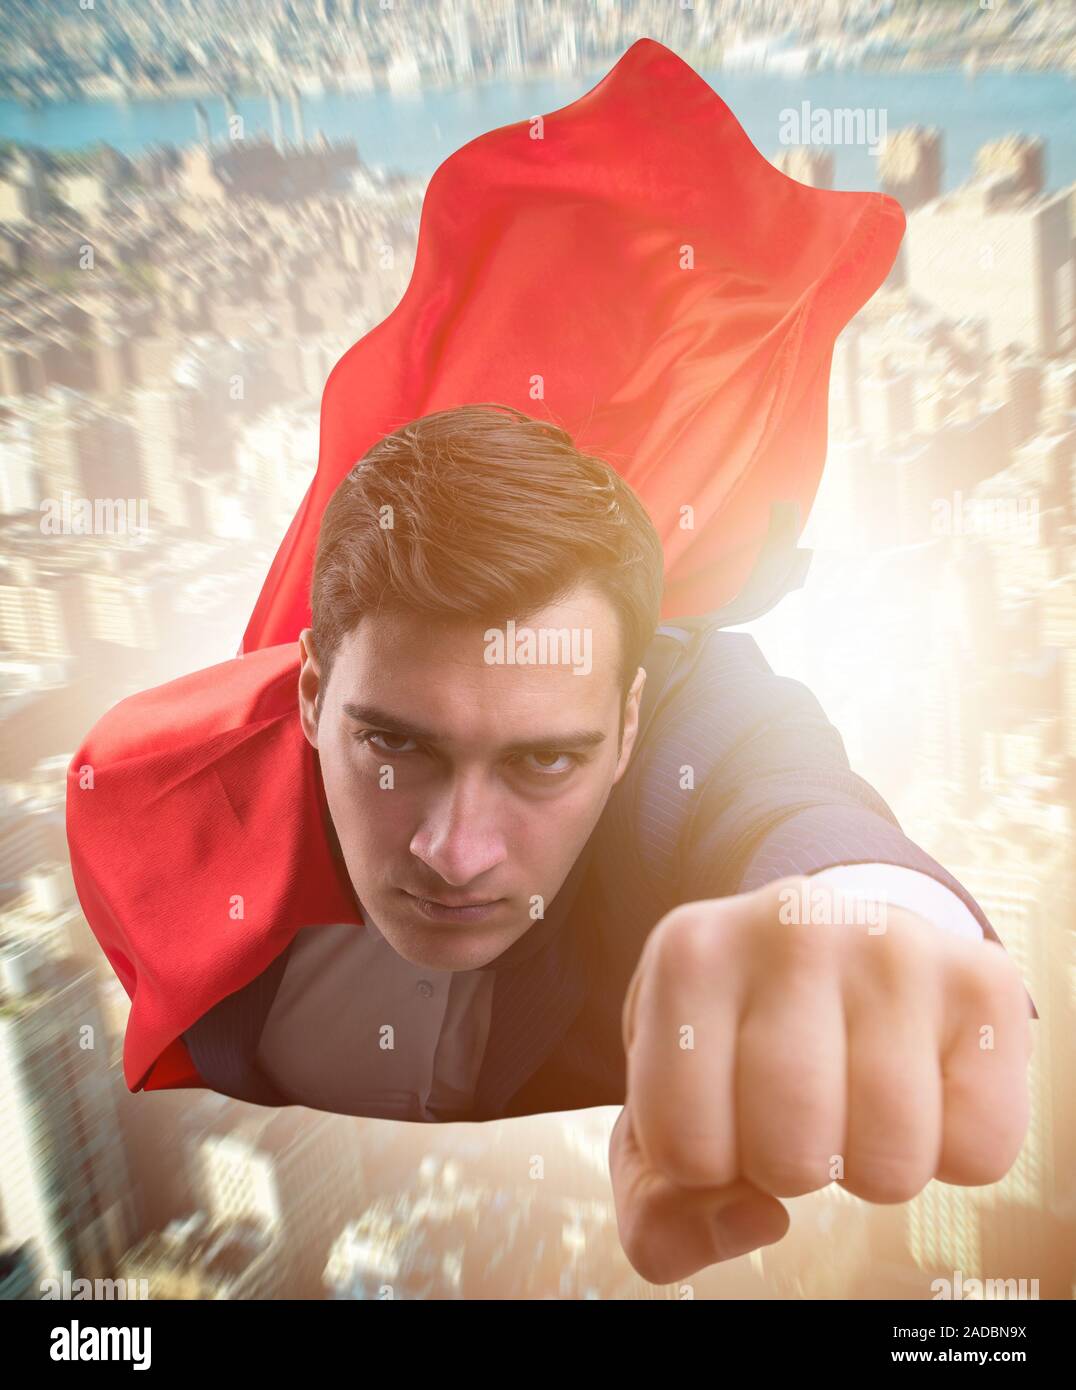 The flying super hero over the city Stock Photo